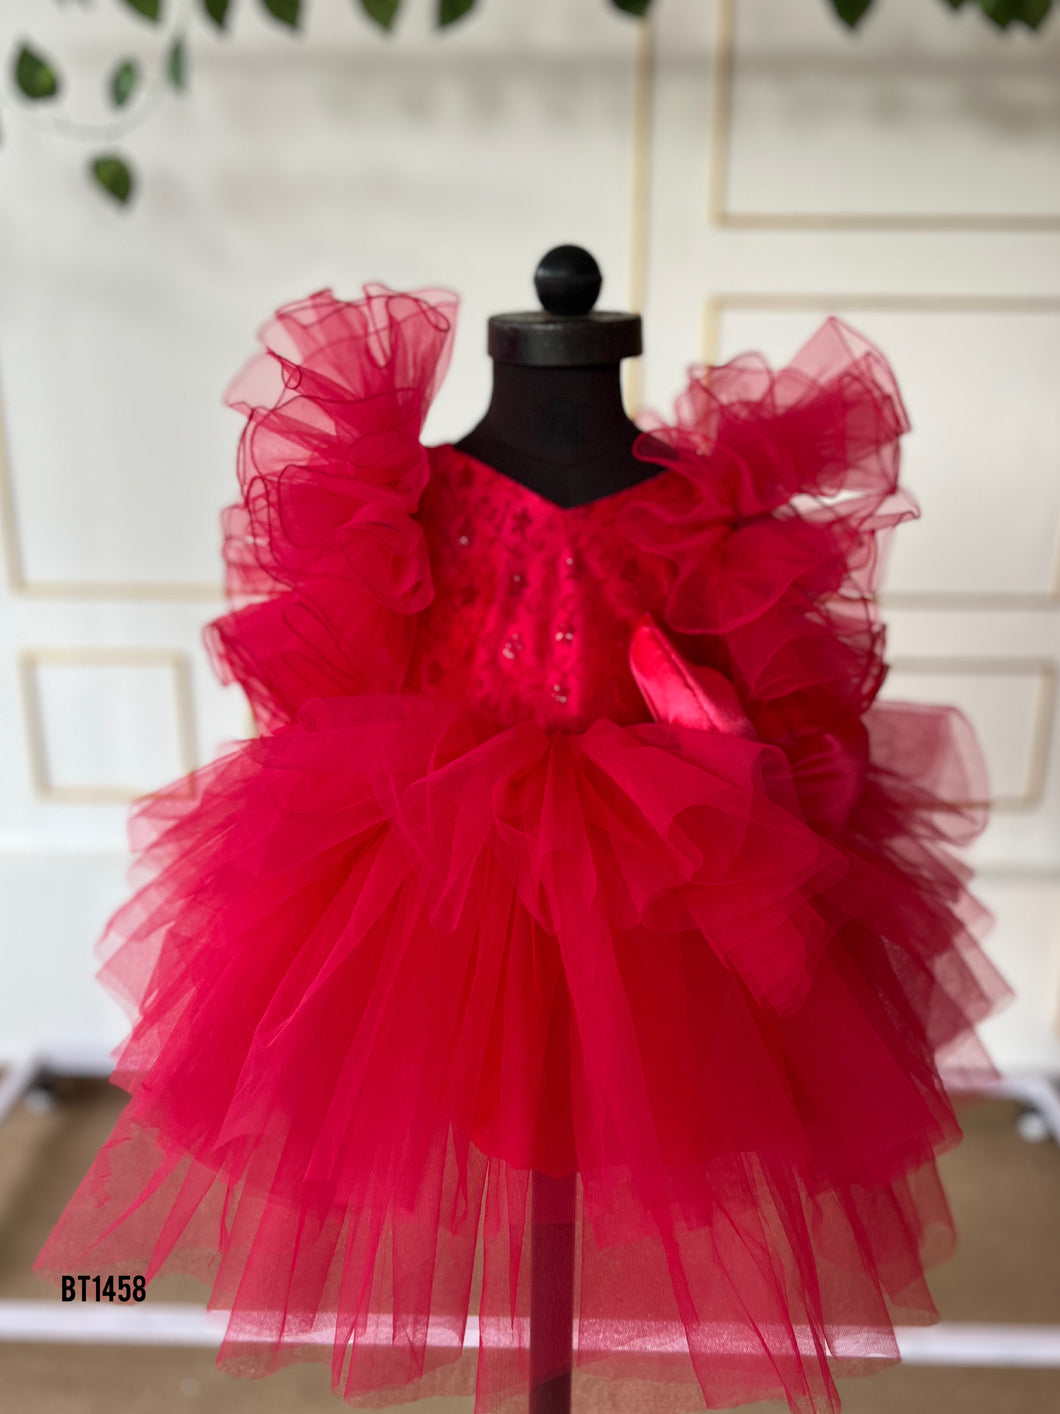 BT1458 Radiant Ruby Ruffle Gala Dress for Little Showstoppers